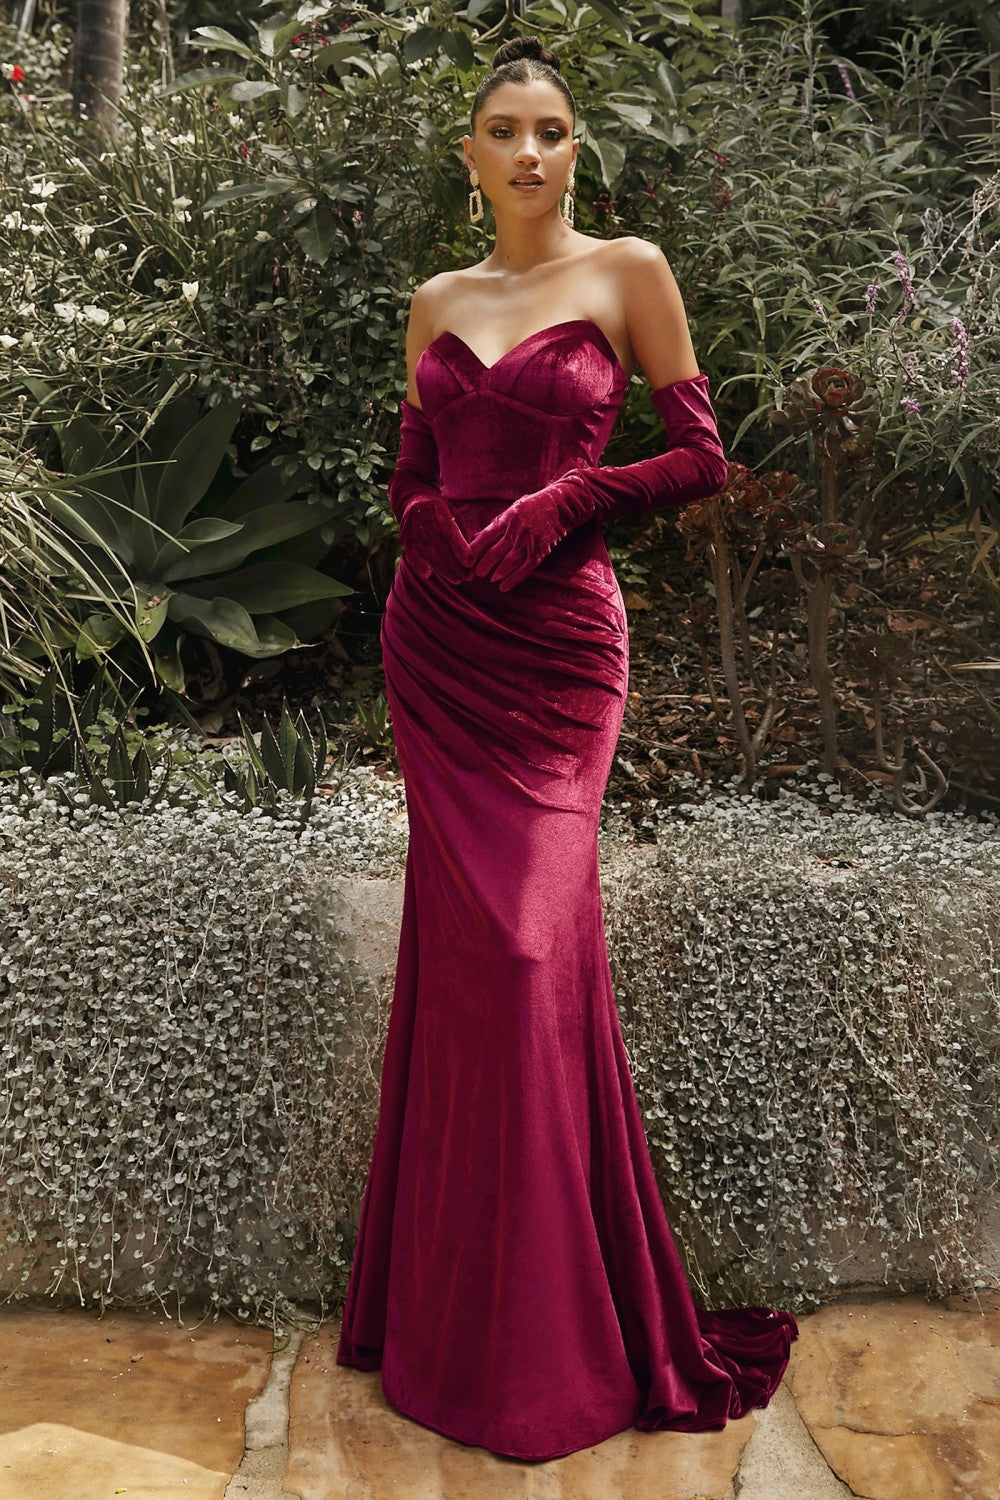 A vintage take on classic glamour, Ch176 captures the feel of old Hollywood with the refreshing energy of the modern era. This luxe design features a corset-inspired bodice with a mermaid skirt in velvet fabrication. Adorned with jewel tones, it comes with detachable gloves for a versatile and dramatic appeal.